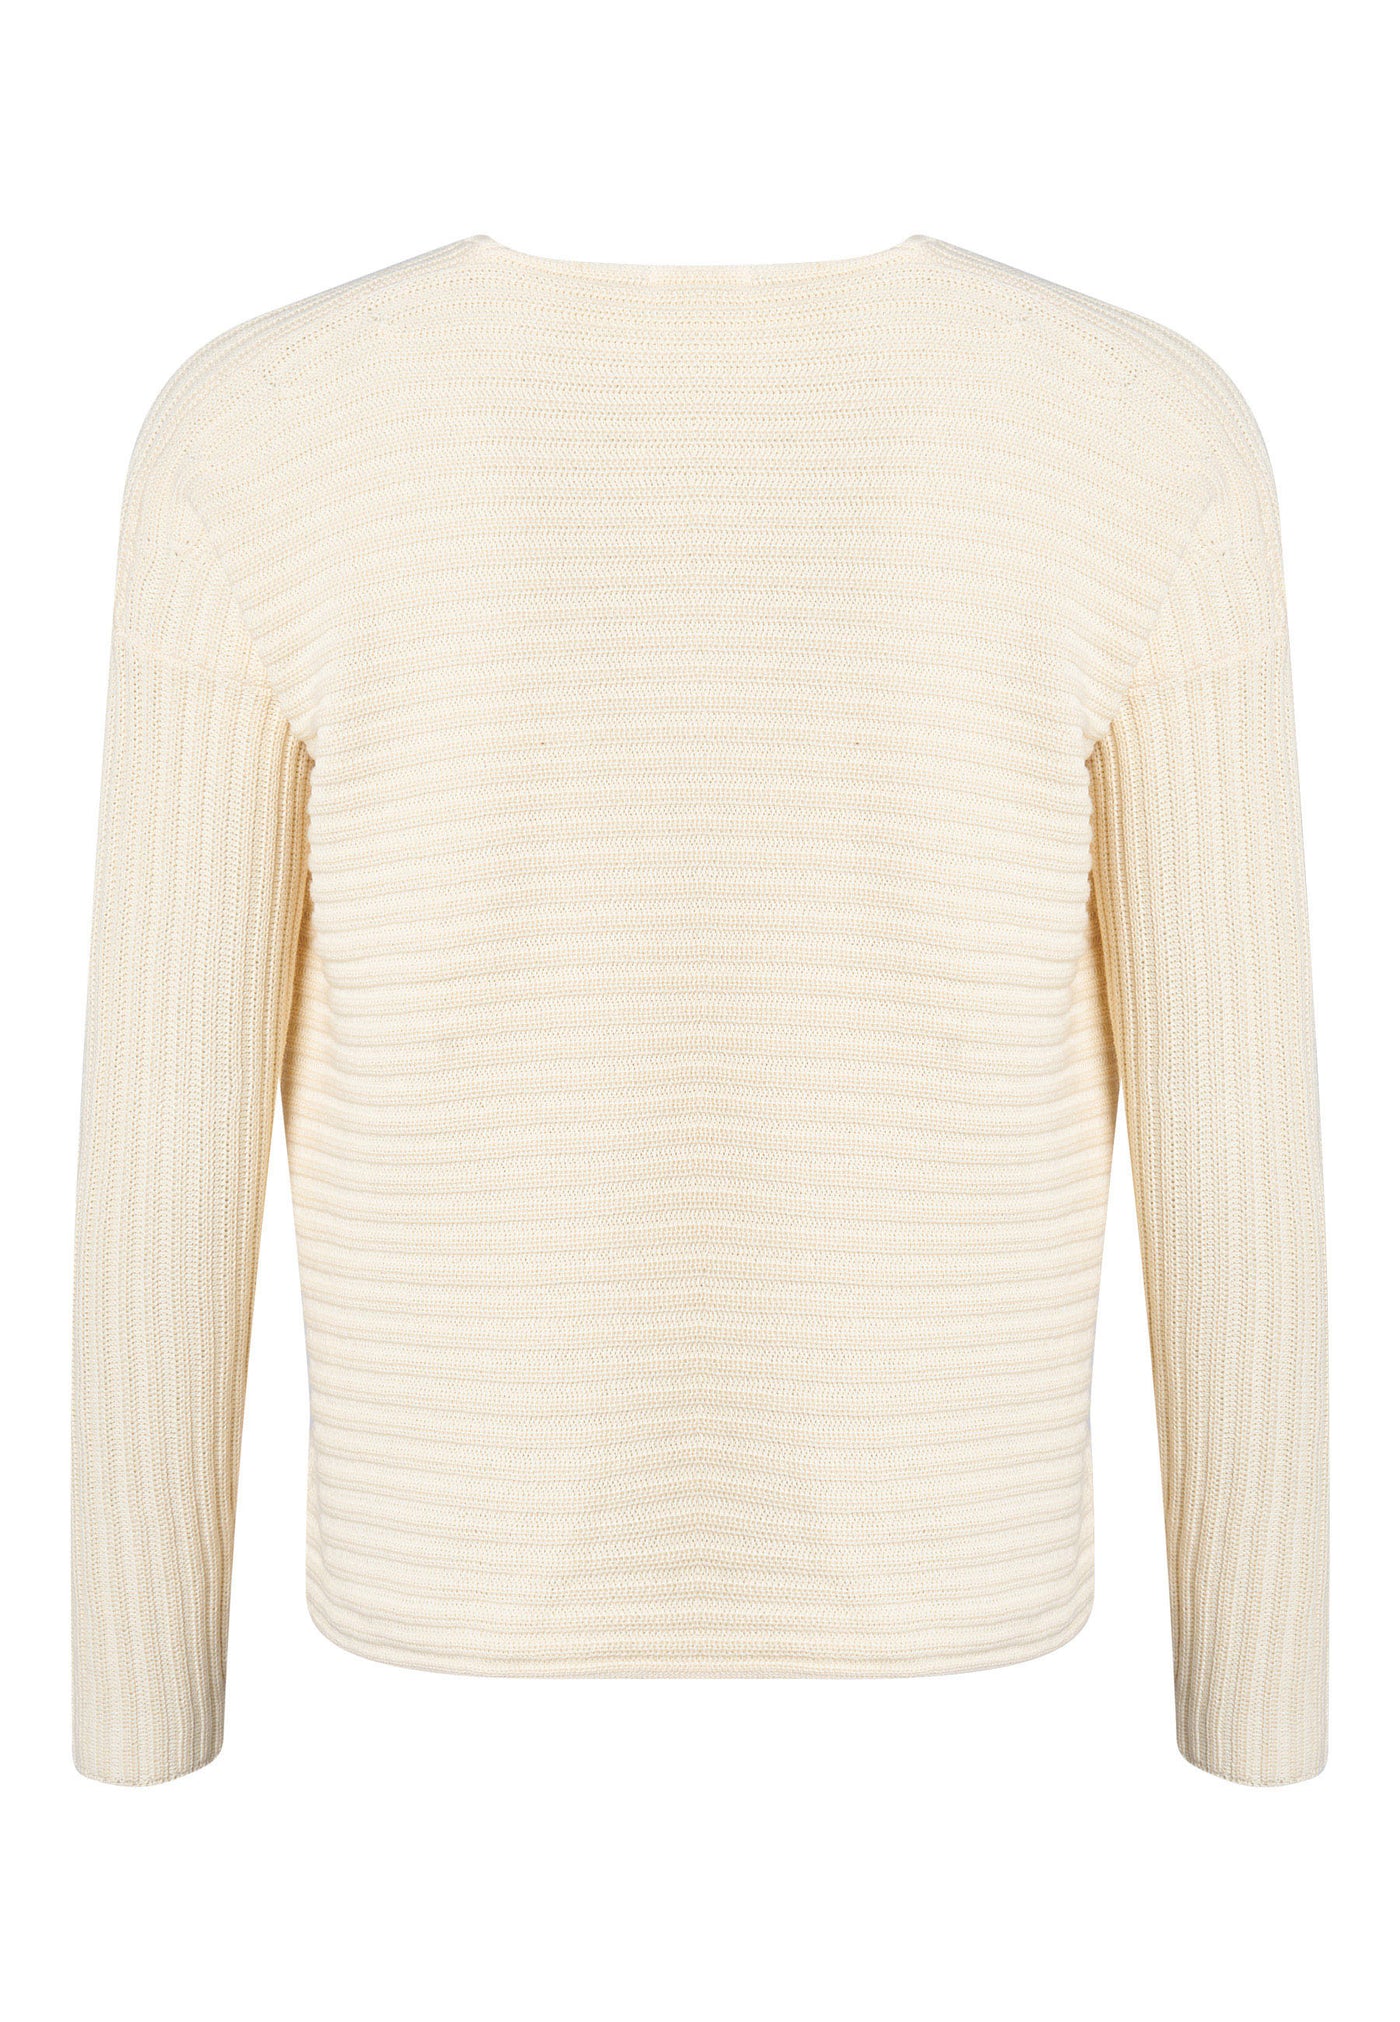 Lind Mona Knit Pullover 1001 Off white